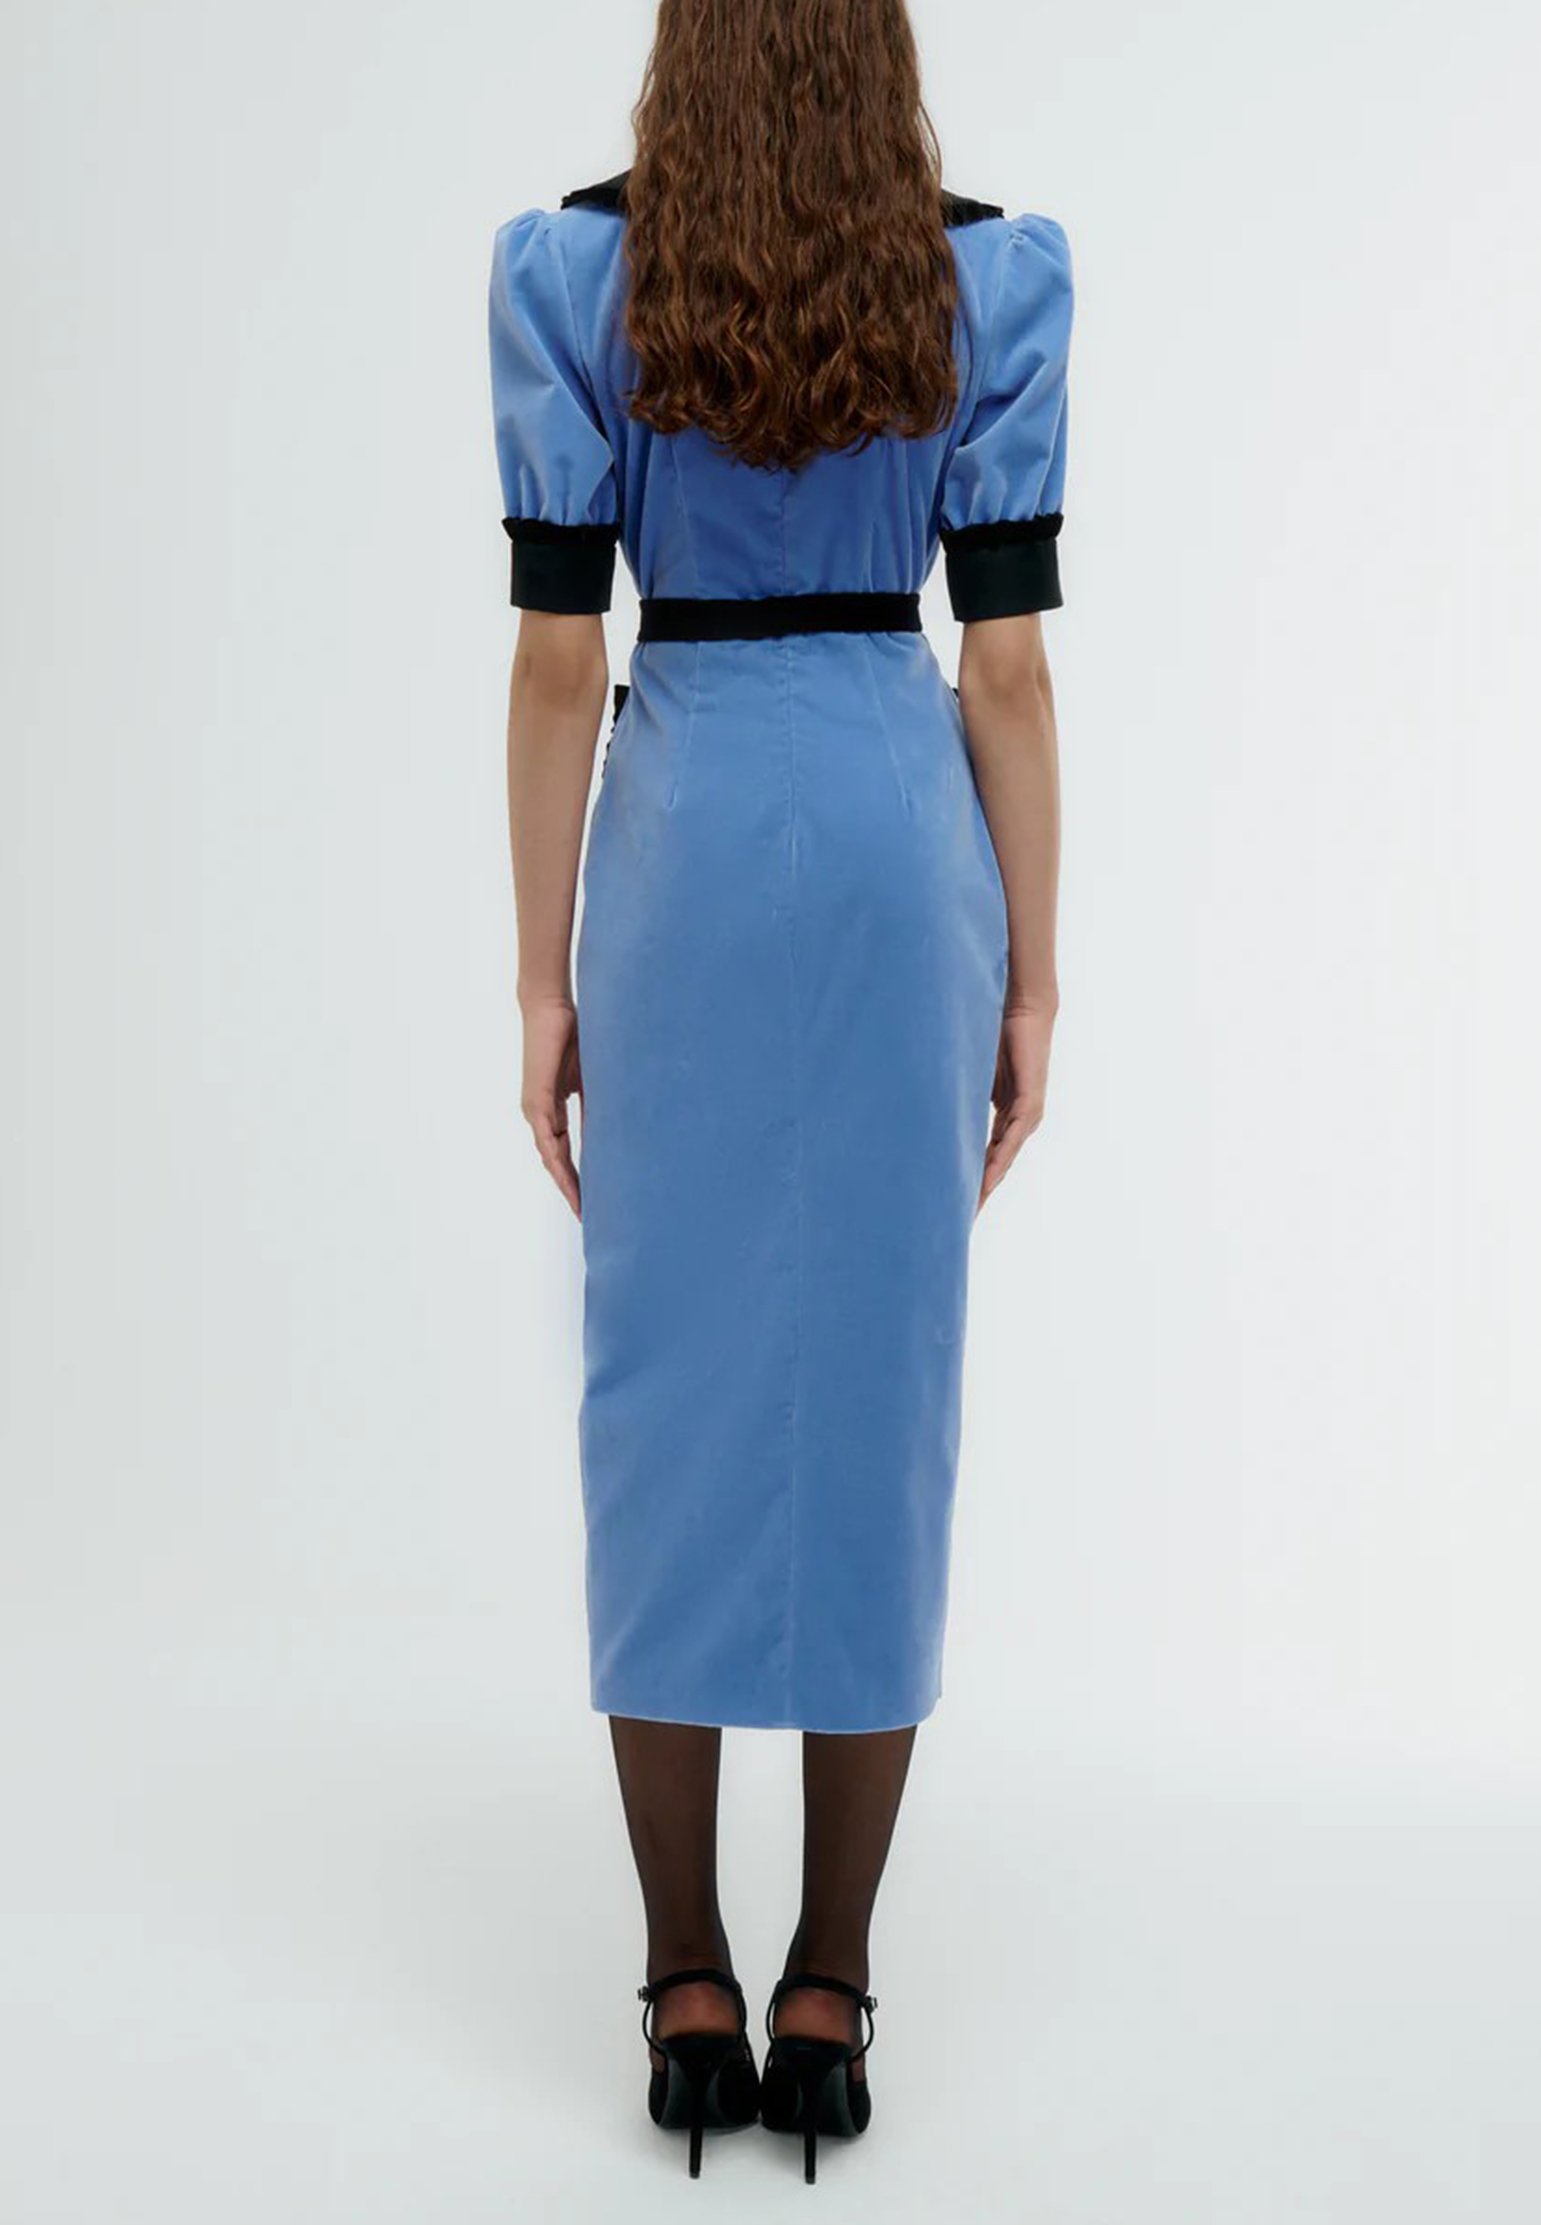 Dress ALESSANDRA RICH Color: light blue (Code: 818) in online store Allure